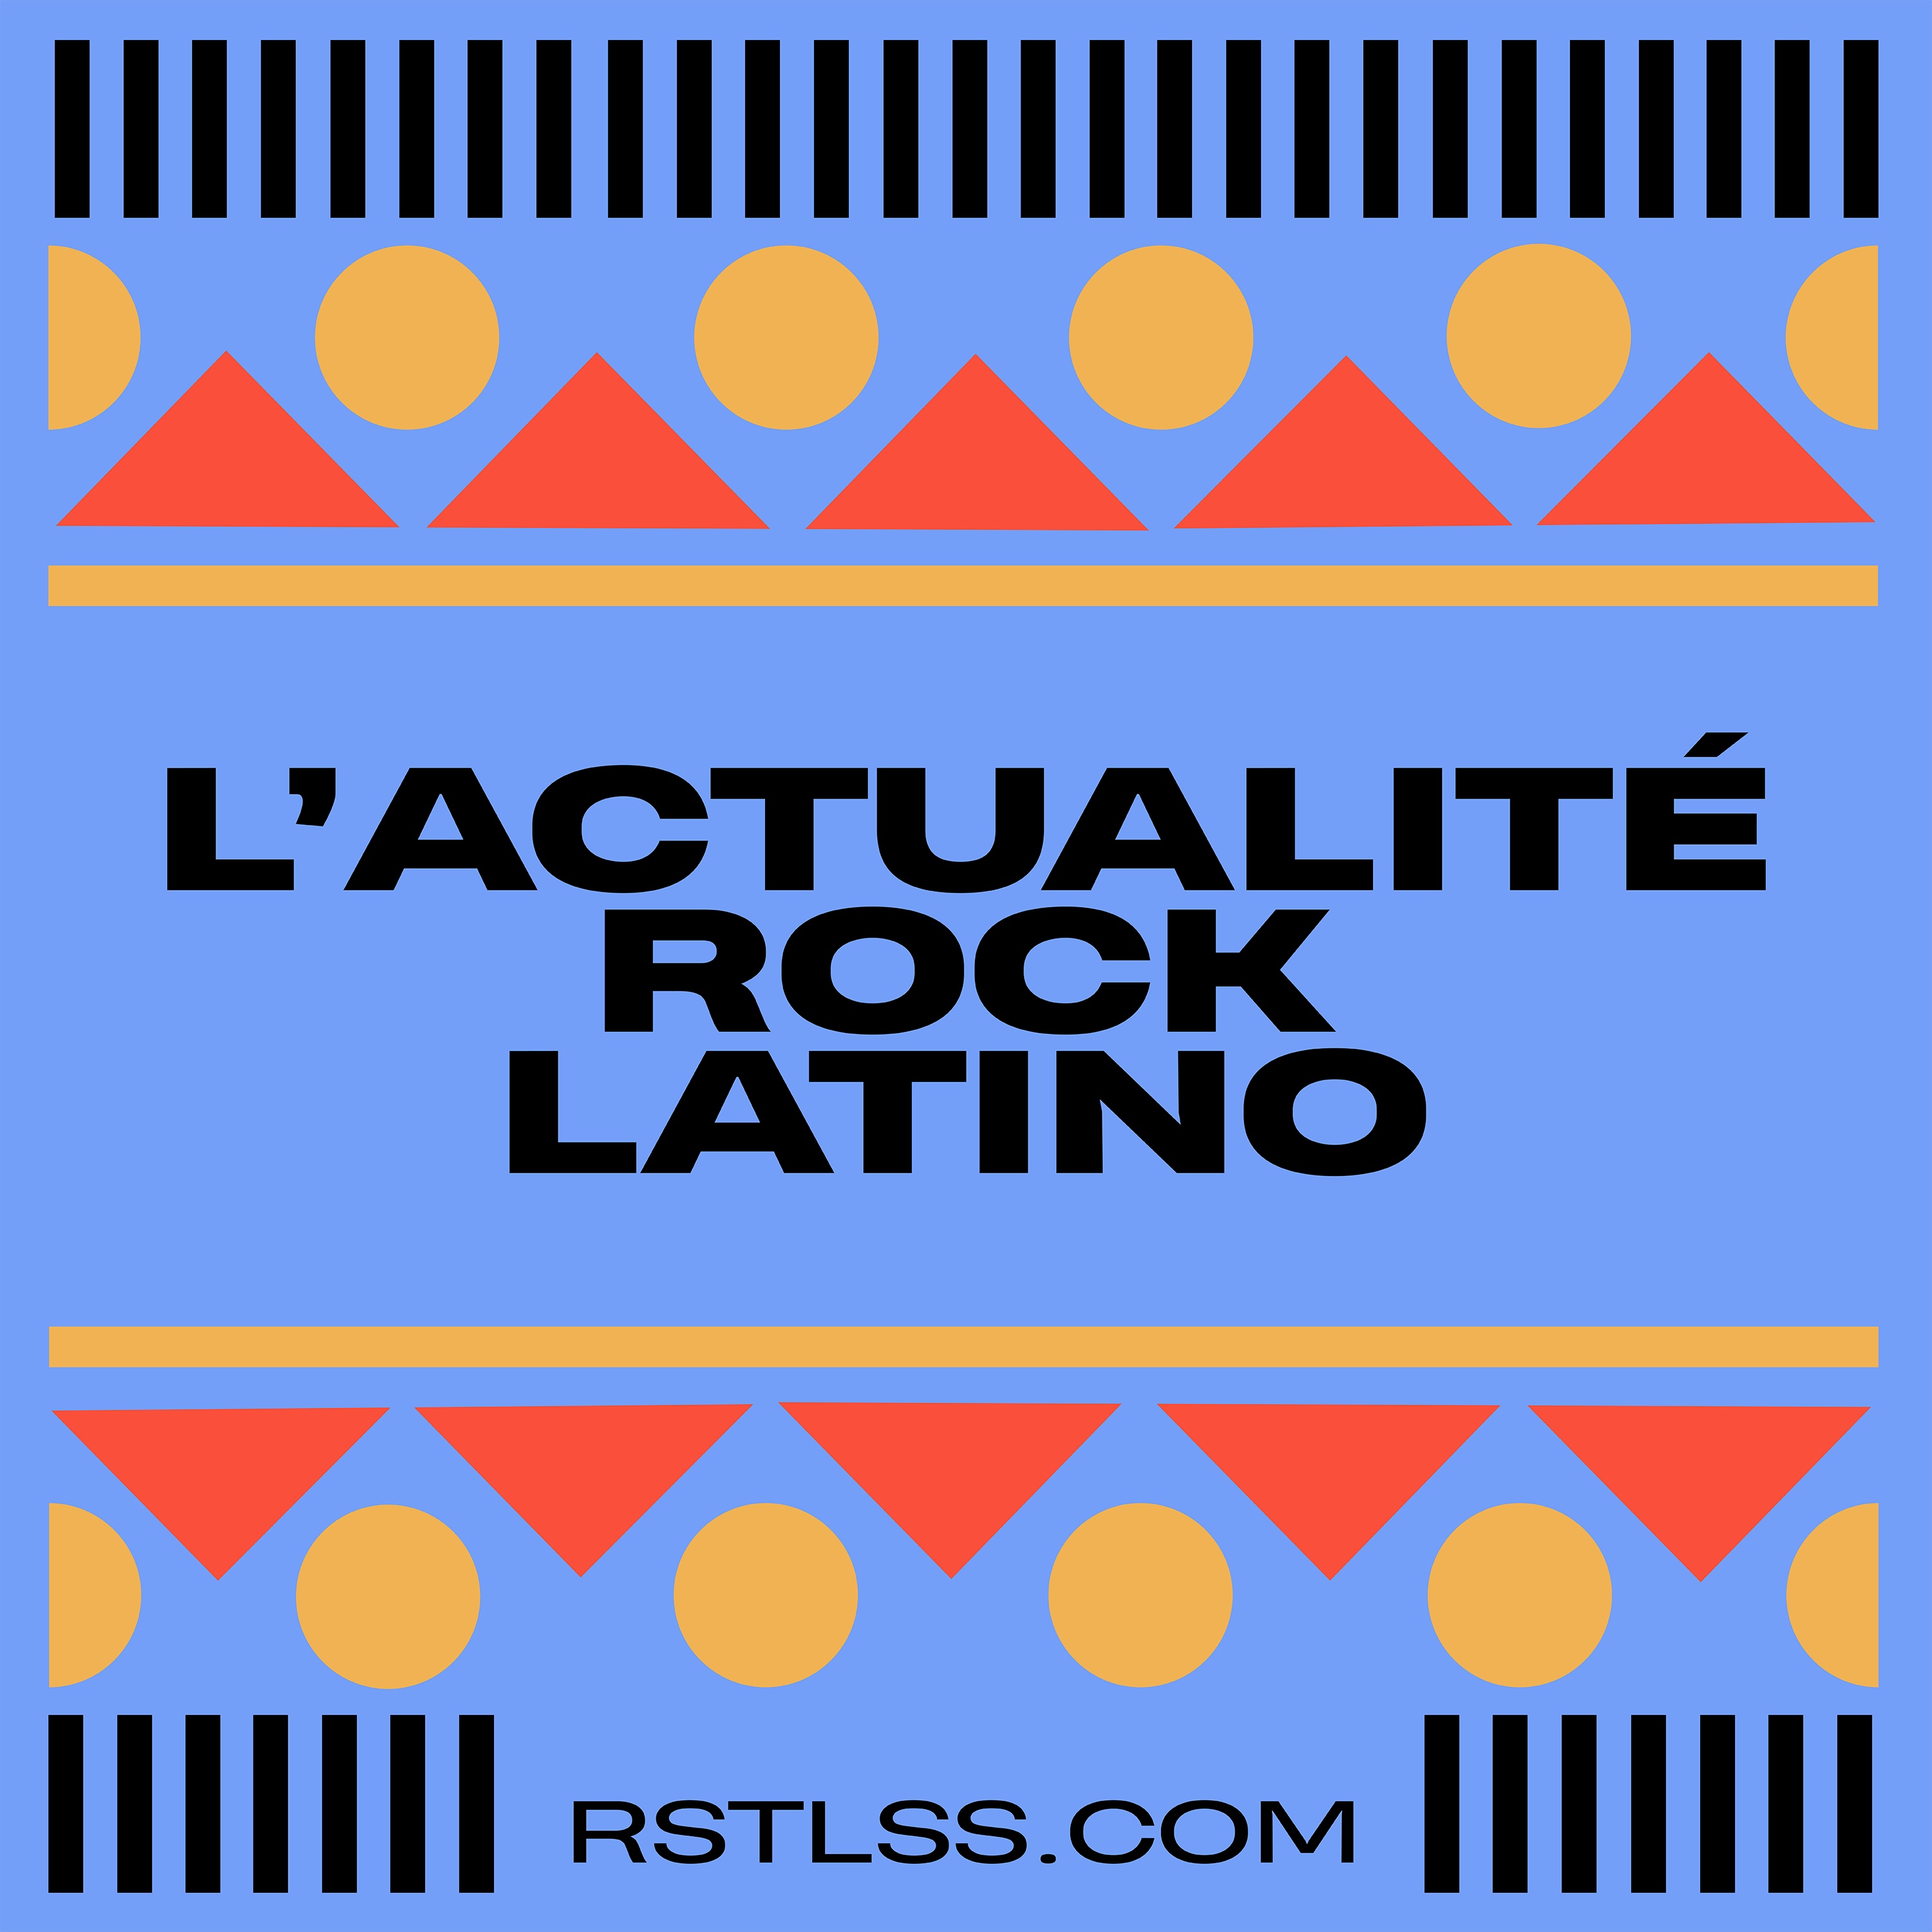 L’ACTUALITÉ ROCK LATINO #7 - Junkbreed "Dominant Alpha Male"